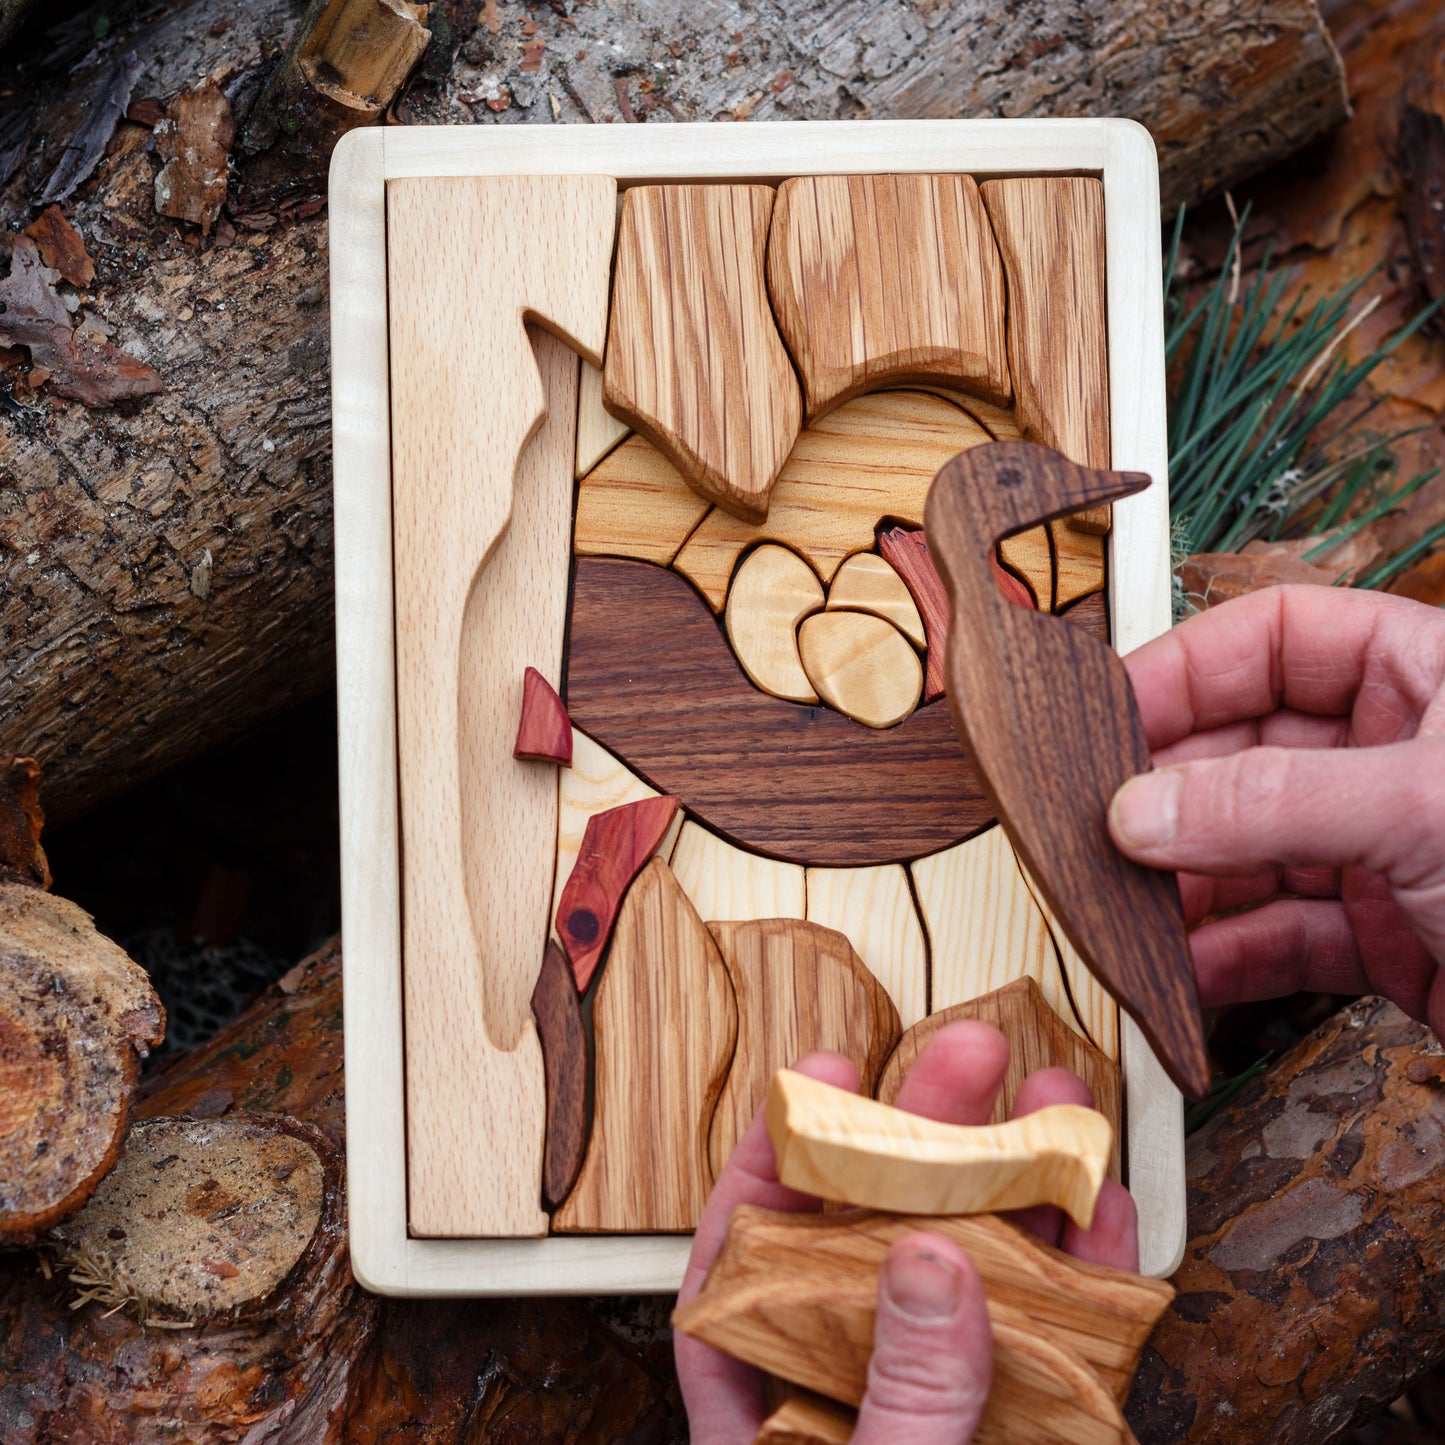 Woodpecker puzzle- child holding one of the pieces